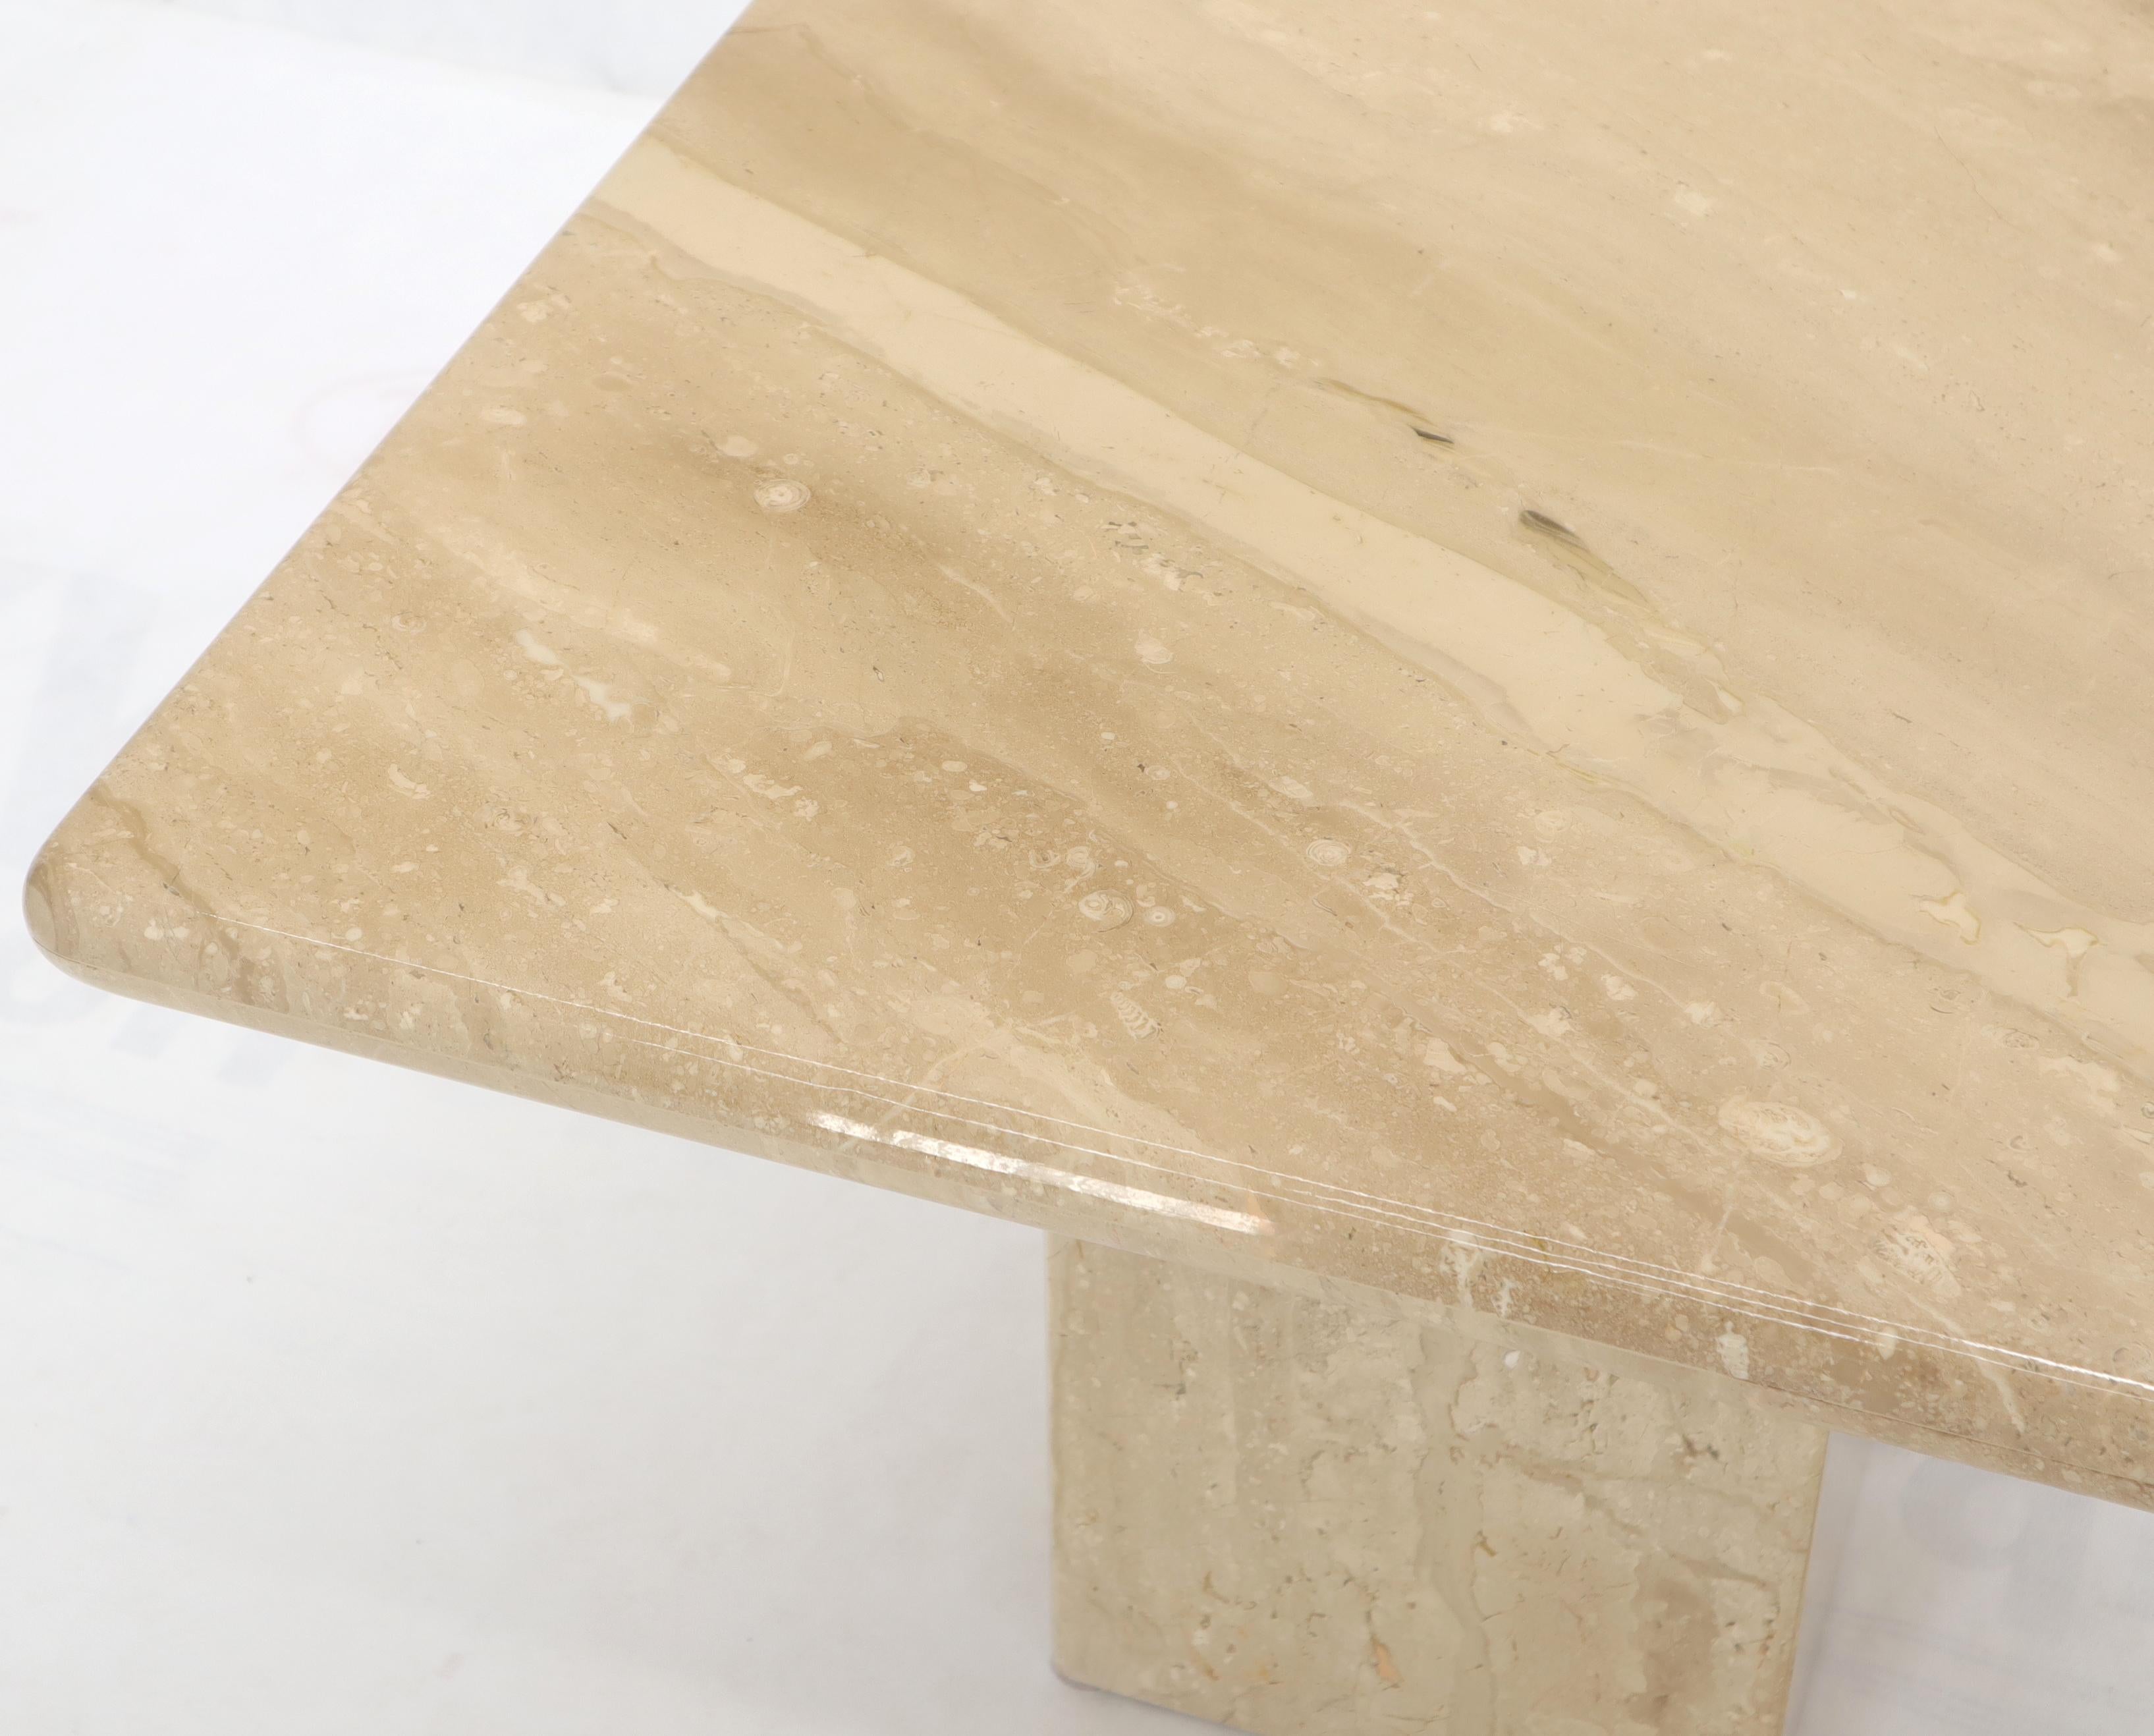 Pair of Marble or Travertine Square Side End Tables In Excellent Condition For Sale In Rockaway, NJ